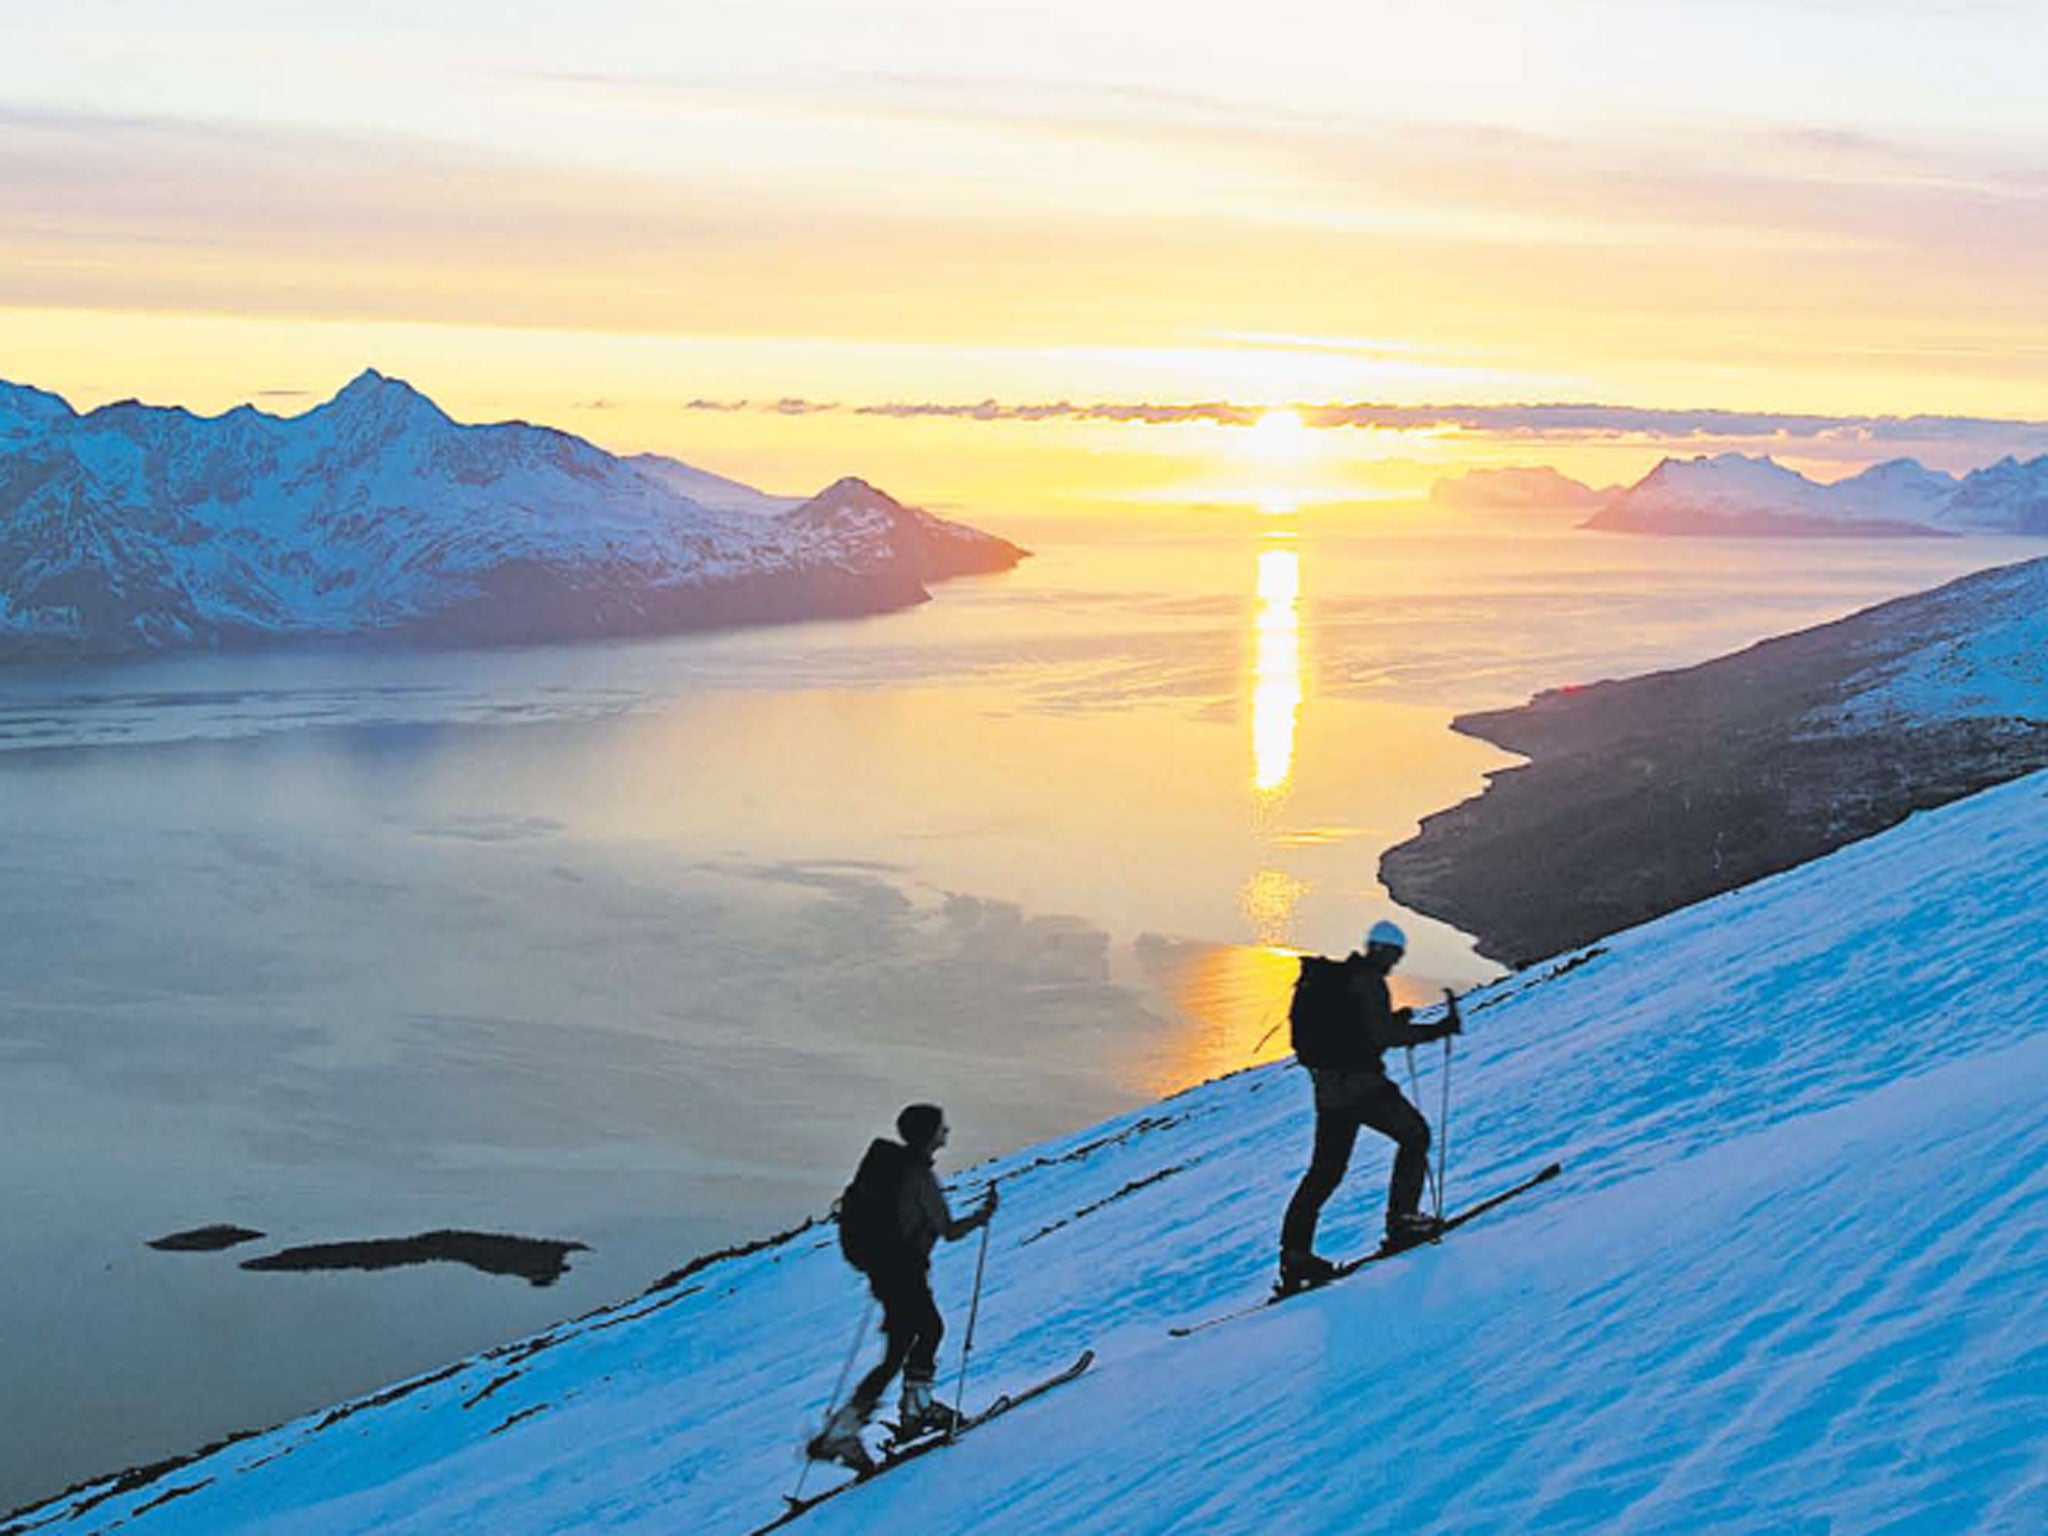 Up and away: Skiing close to Norway’s fjords